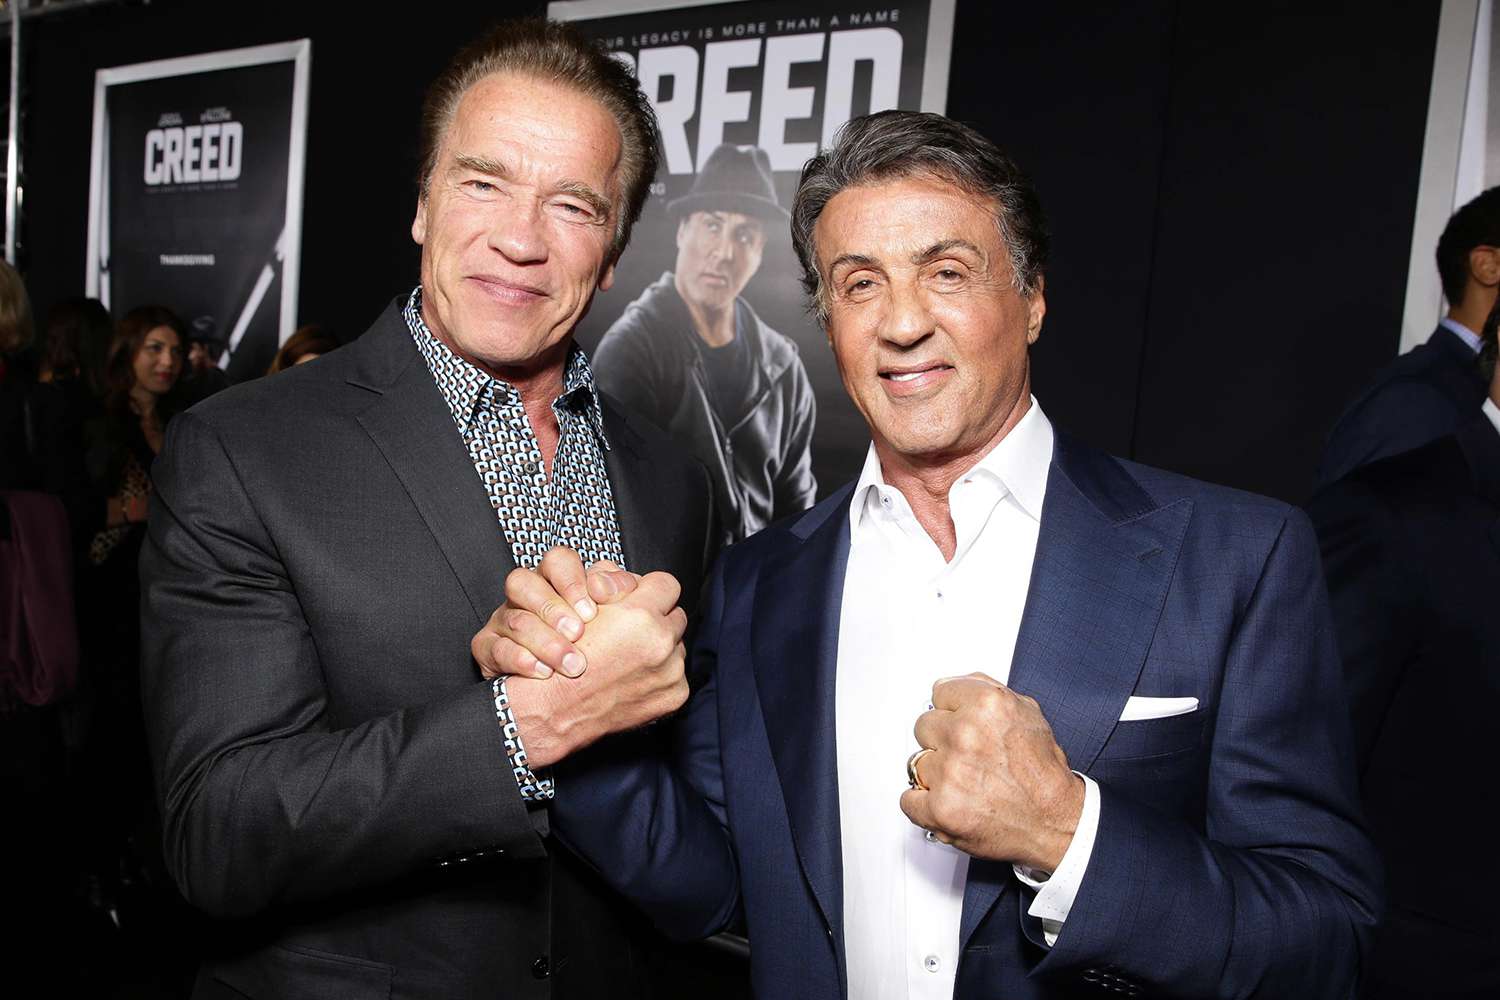 Arnold Schwarzenegger and Producer Sylvester Stallone seen at Los Angeles World Premiere of New Line Cinema's and Metro-Goldwyn-Mayer Pictures' 'Creed' at Regency Village Theater on Thursday, November 19, 2015, in Westwood, CA.